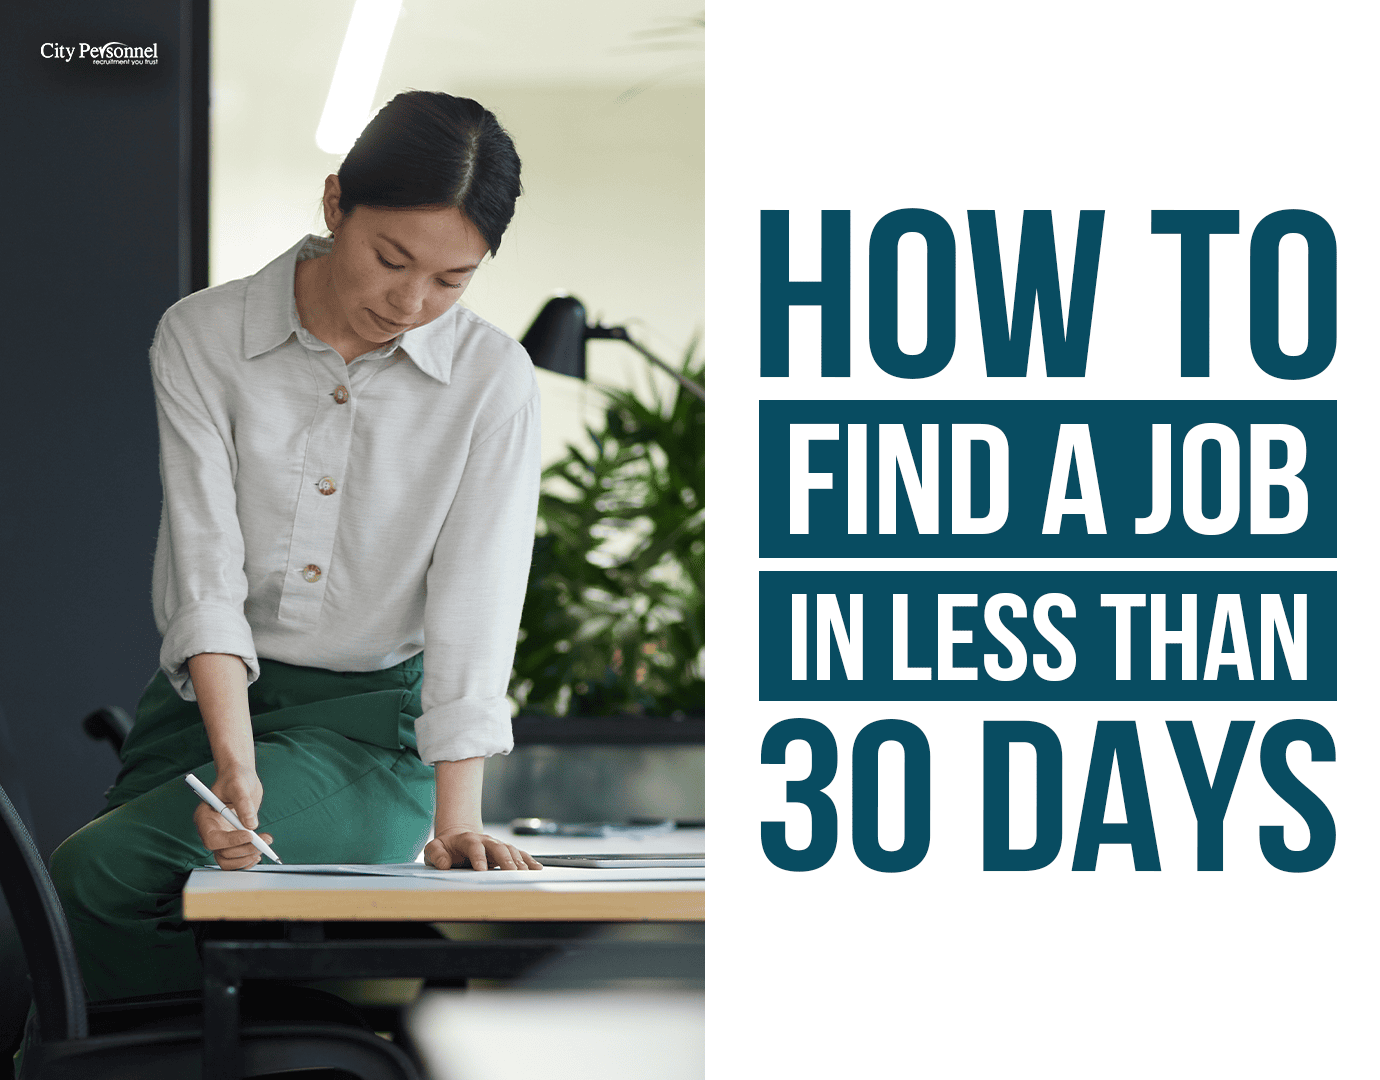 How to Find a Job in Less Than 30 Days